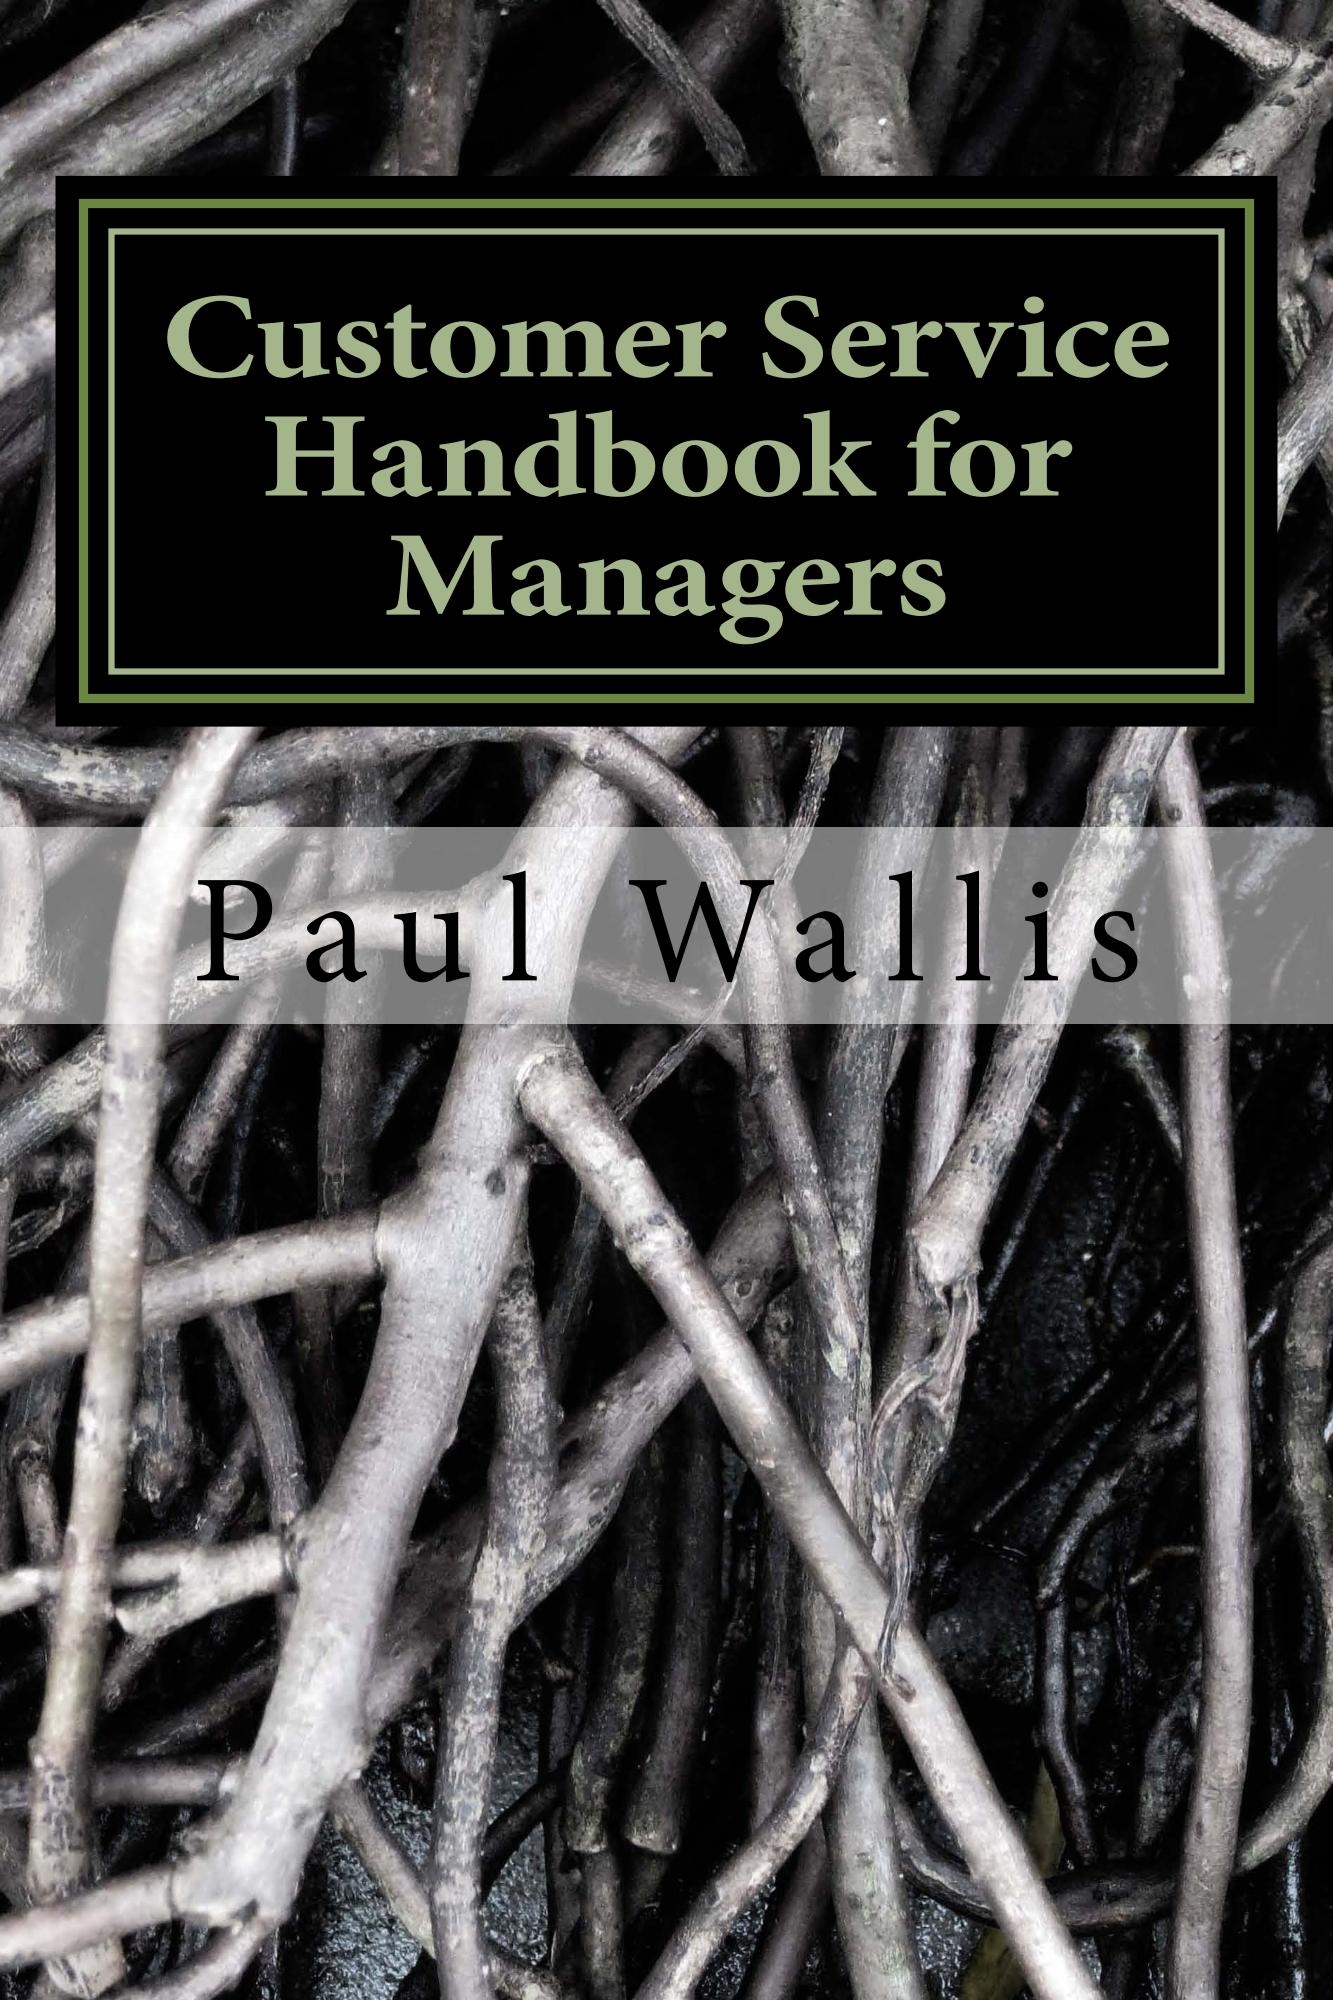 customer service for managers, Paul Wallis books, customer service legal liability, customer service training